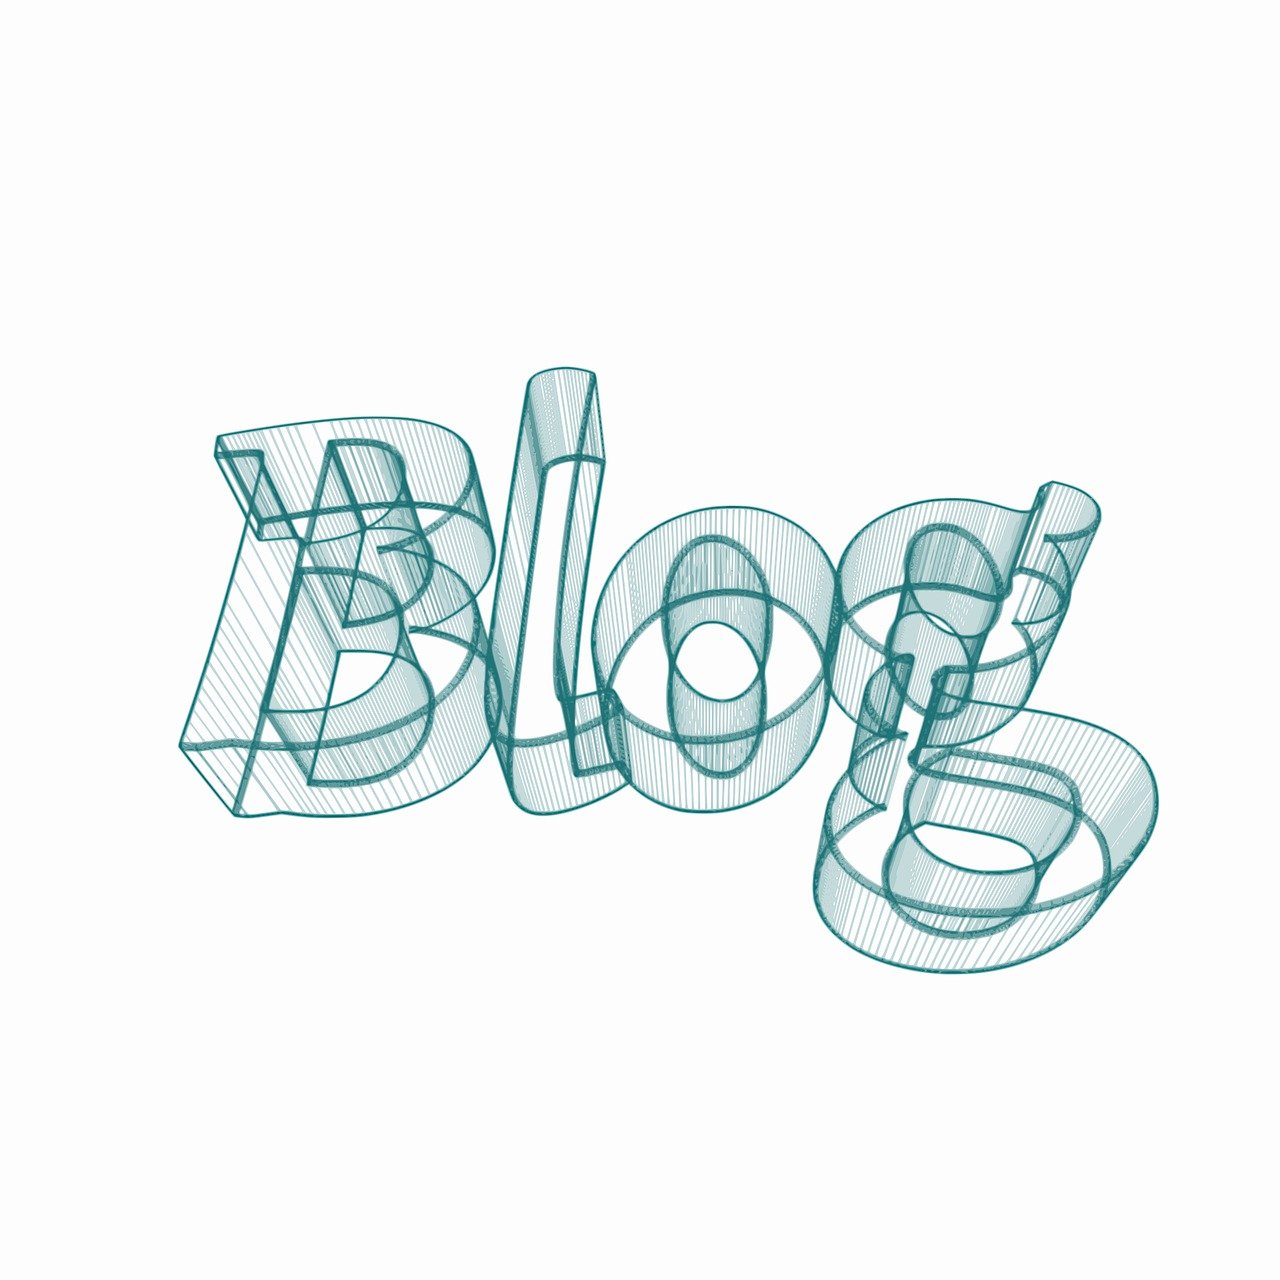 a drawing of the word blog on a white background, a digital rendering, by Joe Bowler, tumblr, 3 d filament, teal, 3 d mesh, symbol